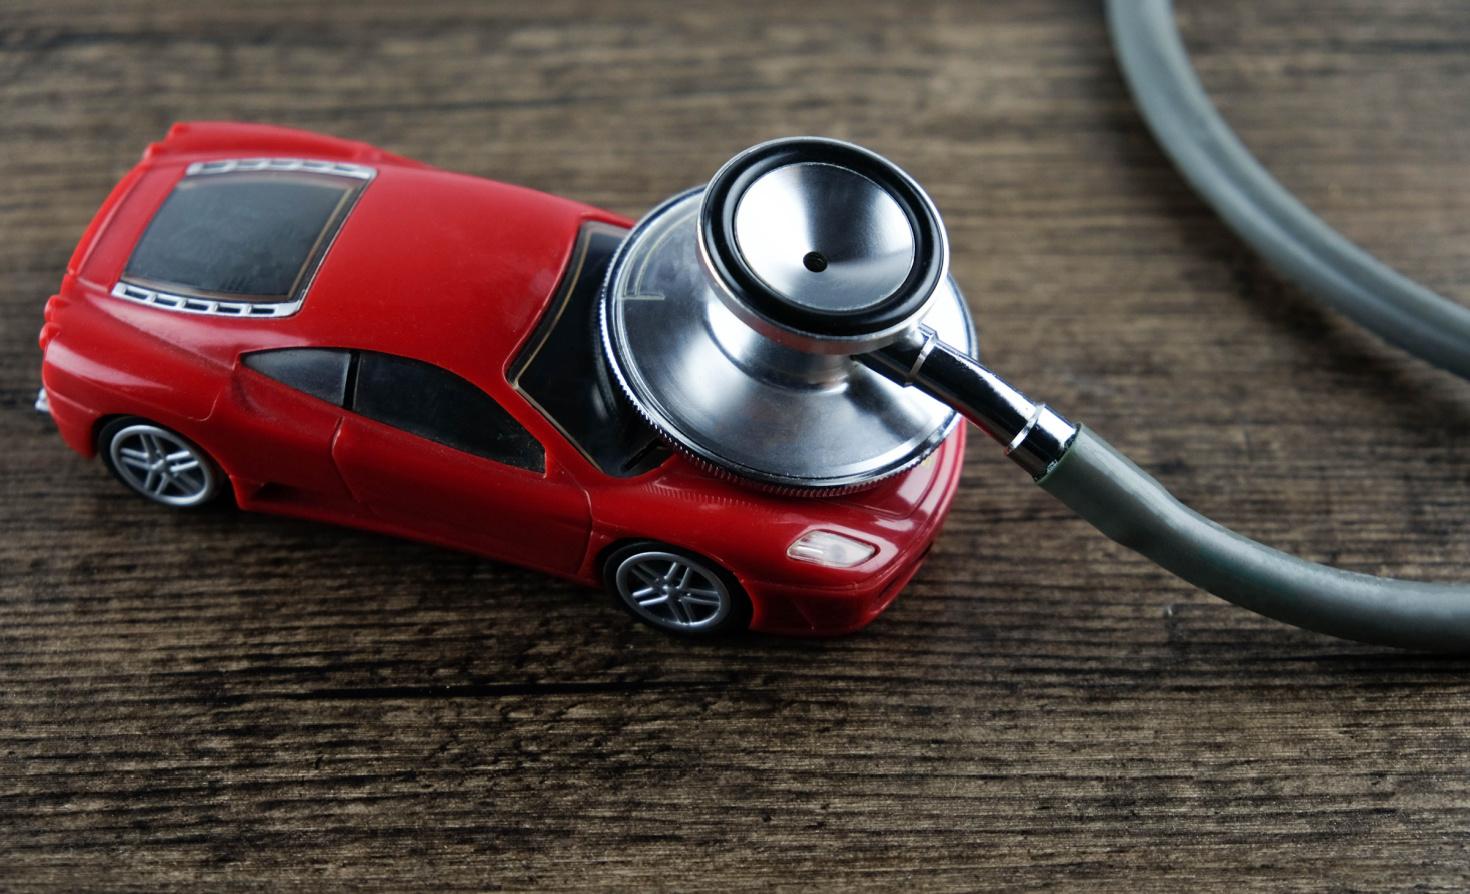 A stethoscope 'listens' to a toy car.